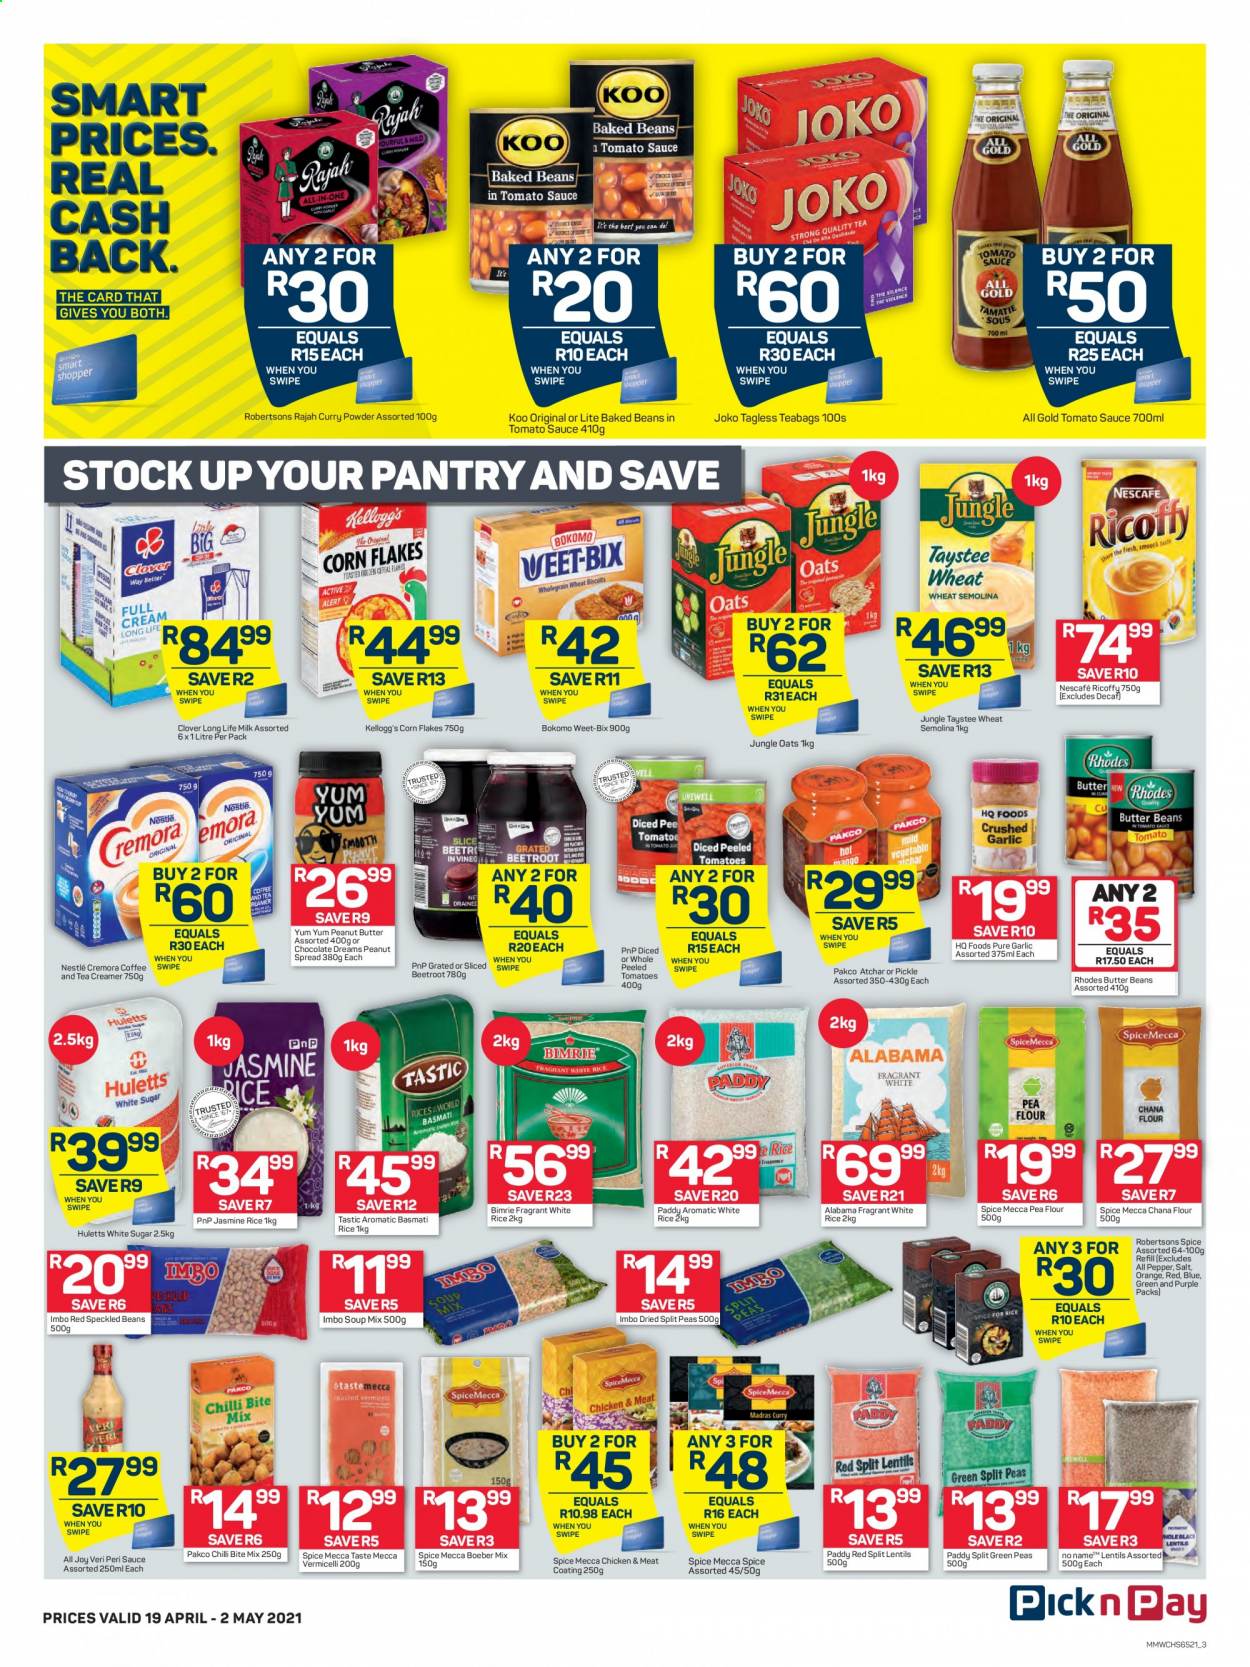 Pick n Pay specials - 04.19.2021 - 05.02.2021. 